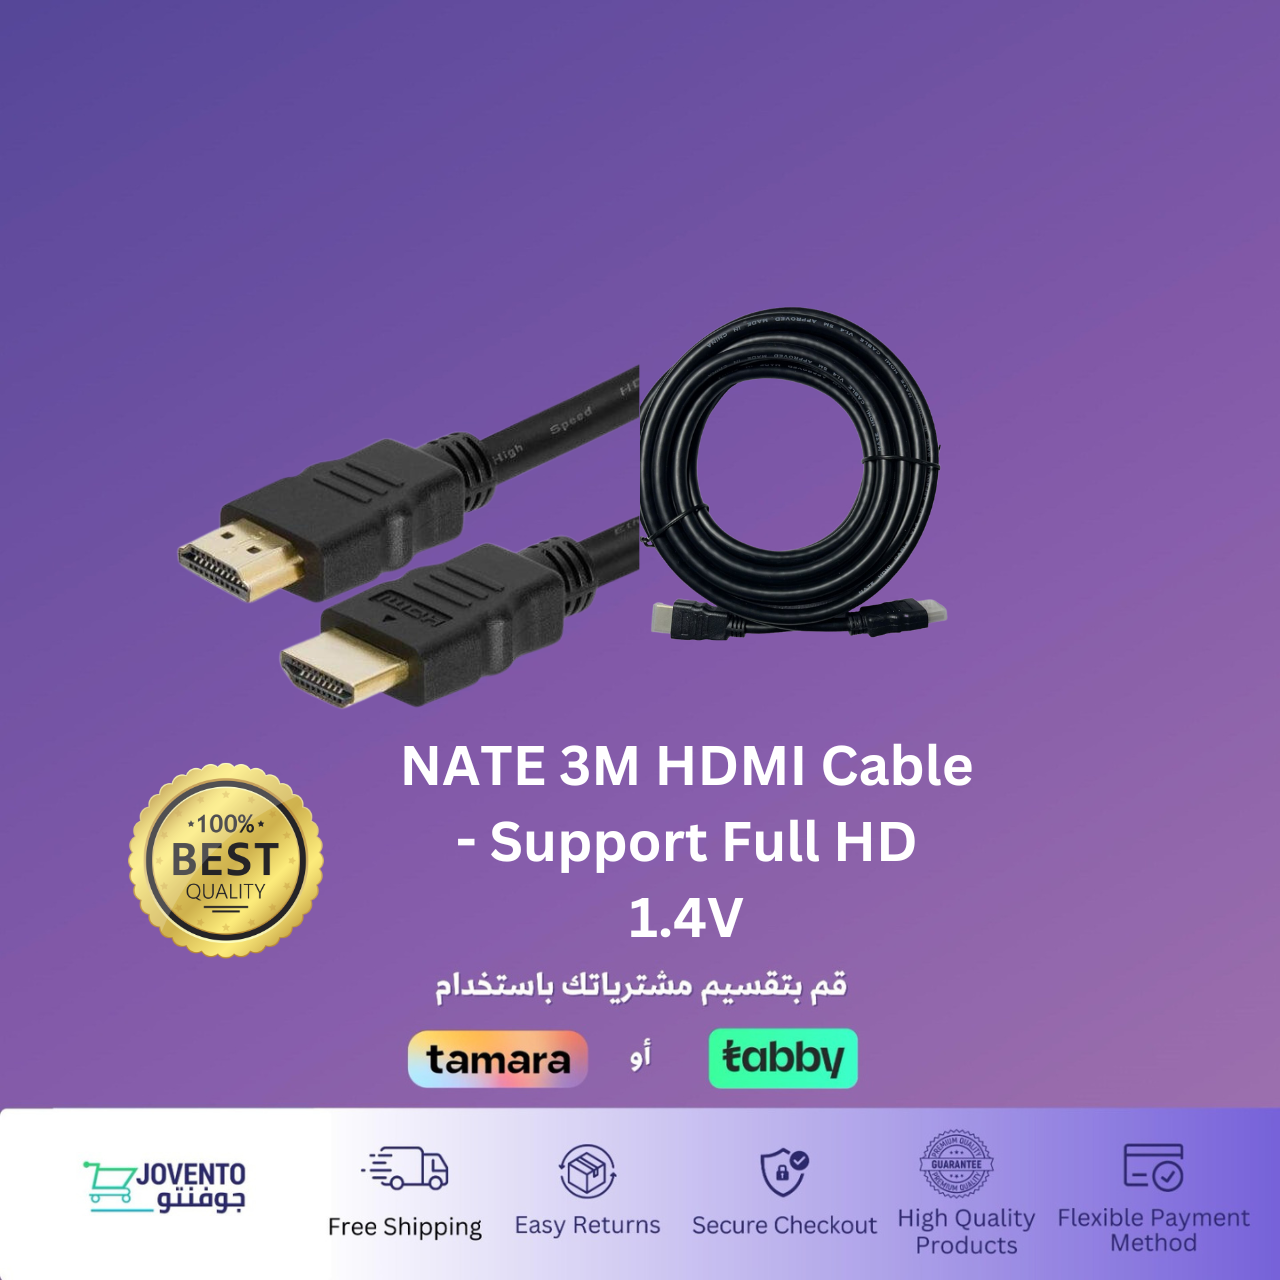 NATE 3M HDMI Cable - Support Full HD 2K 4K 1.4V